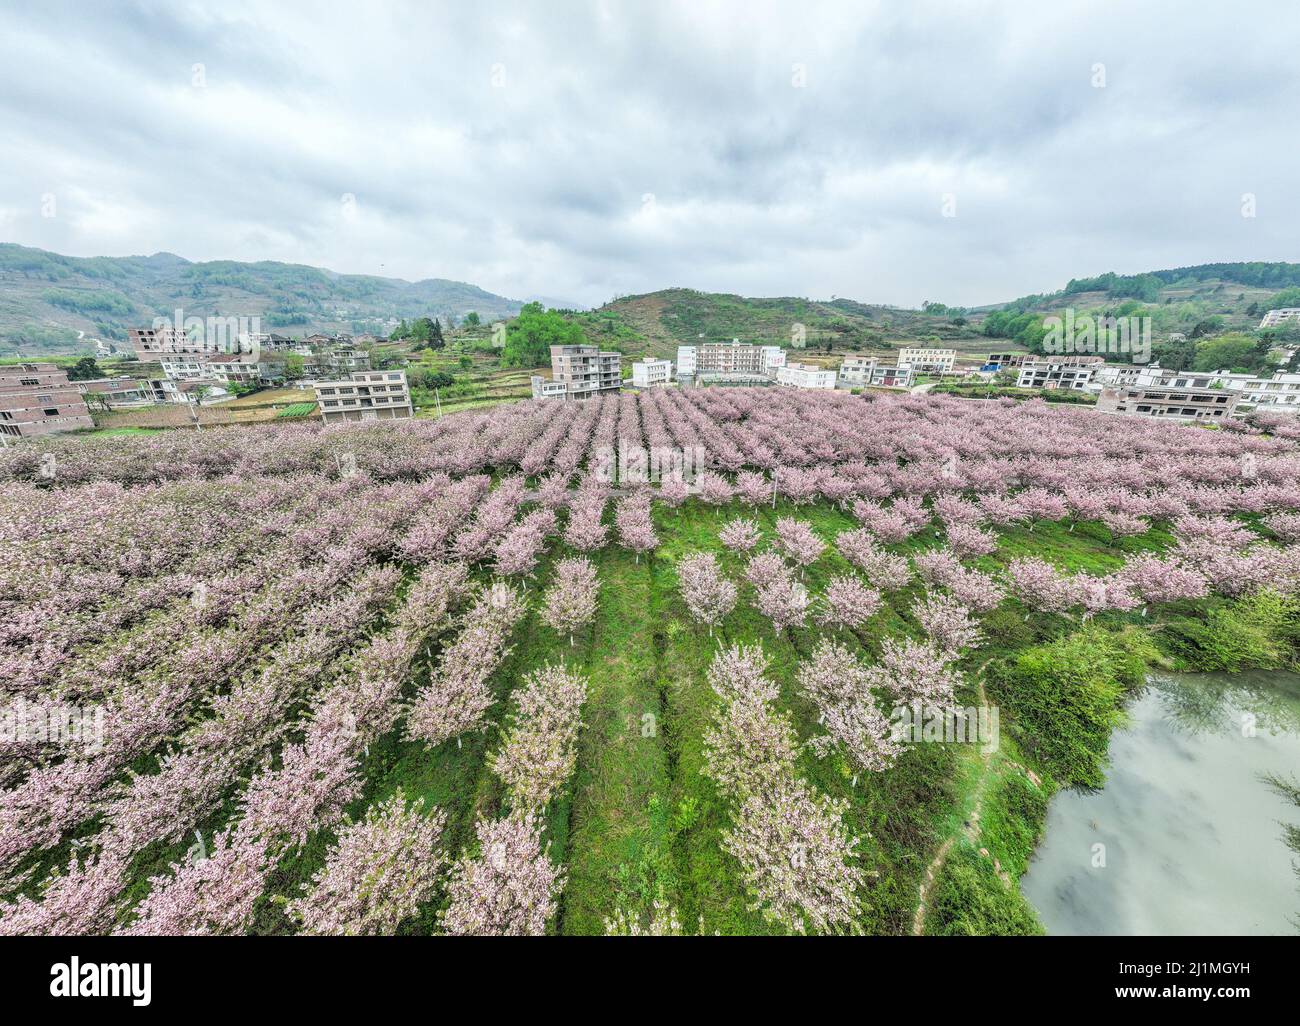 BIJIE, CHINA - MARCH 26, 2022 - Aerial photo taken on March 26, 2022 shows cherry blossom forests in Dazhai Village, Chahe Town, High-tech Zone in Bij Stock Photo